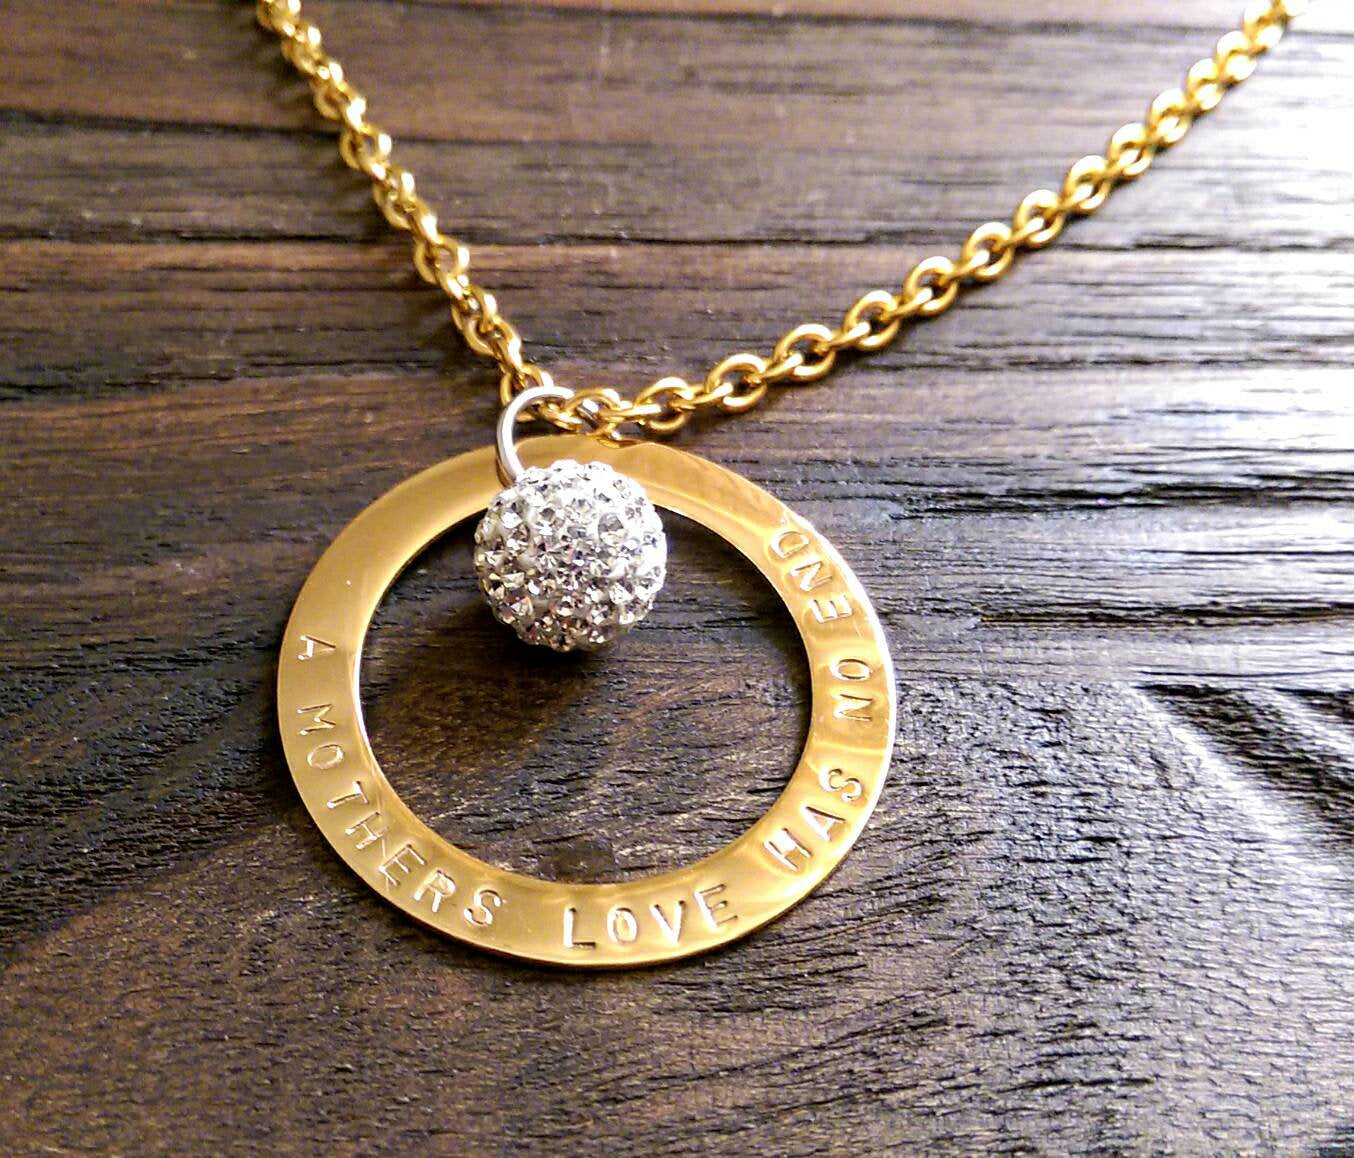 Personalised Name Hand Stamped Necklace Gold Stainless Steel with Crystal Ball - Silver and Resin Designs